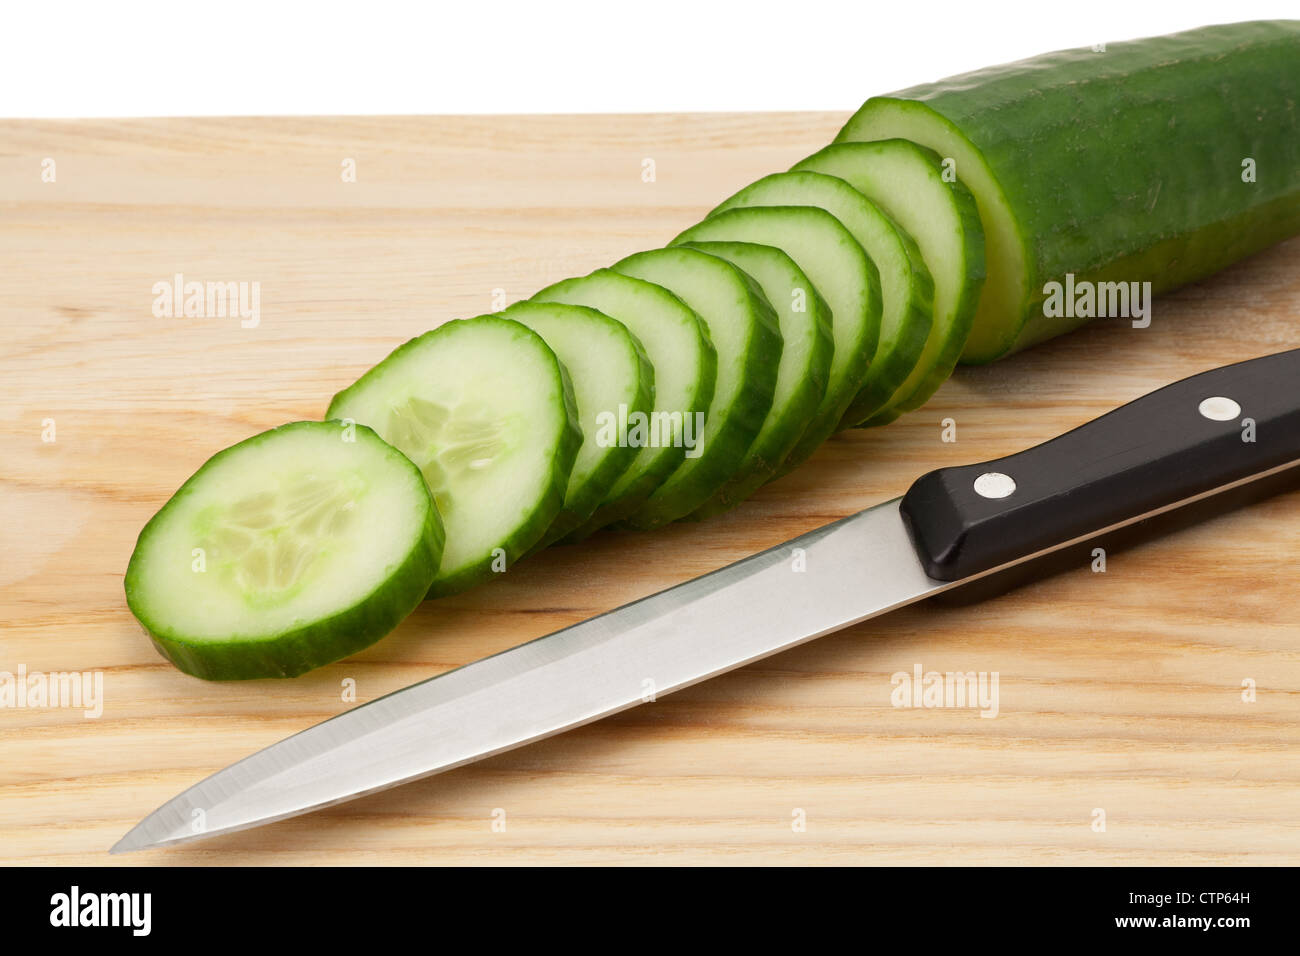 Sliced cucumber on a wooden cutting board with a kitchen knife - studio shot Stock Photo